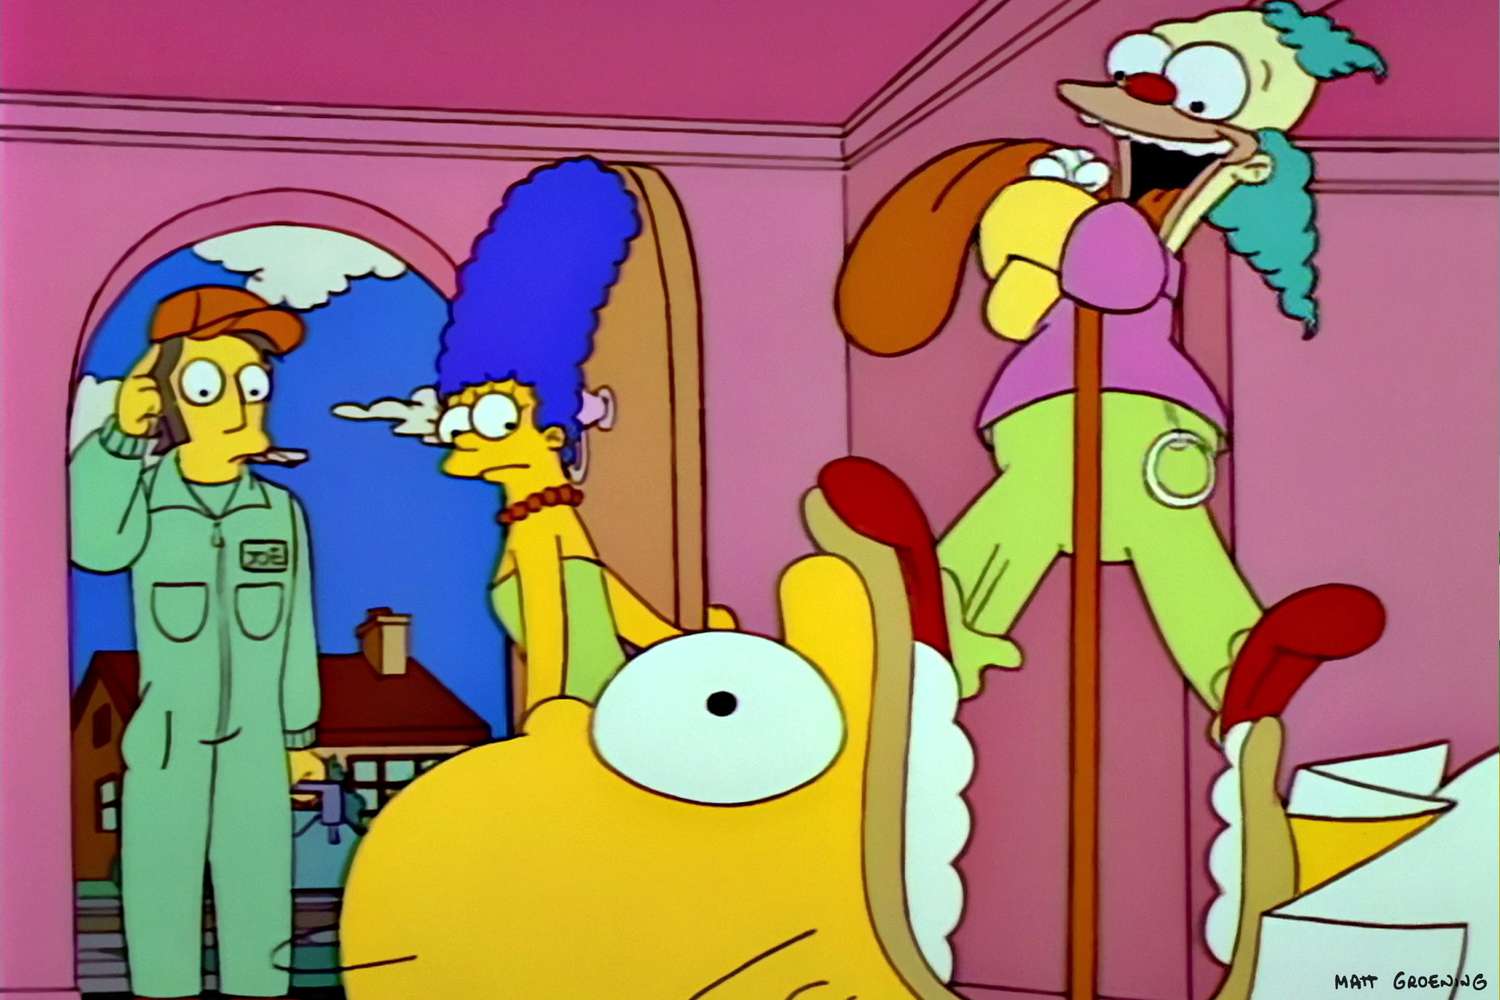 Duff Movie Puppy Cartoon Porn - The Simpsons Treehouse of Horror episodes, ranked | EW.com